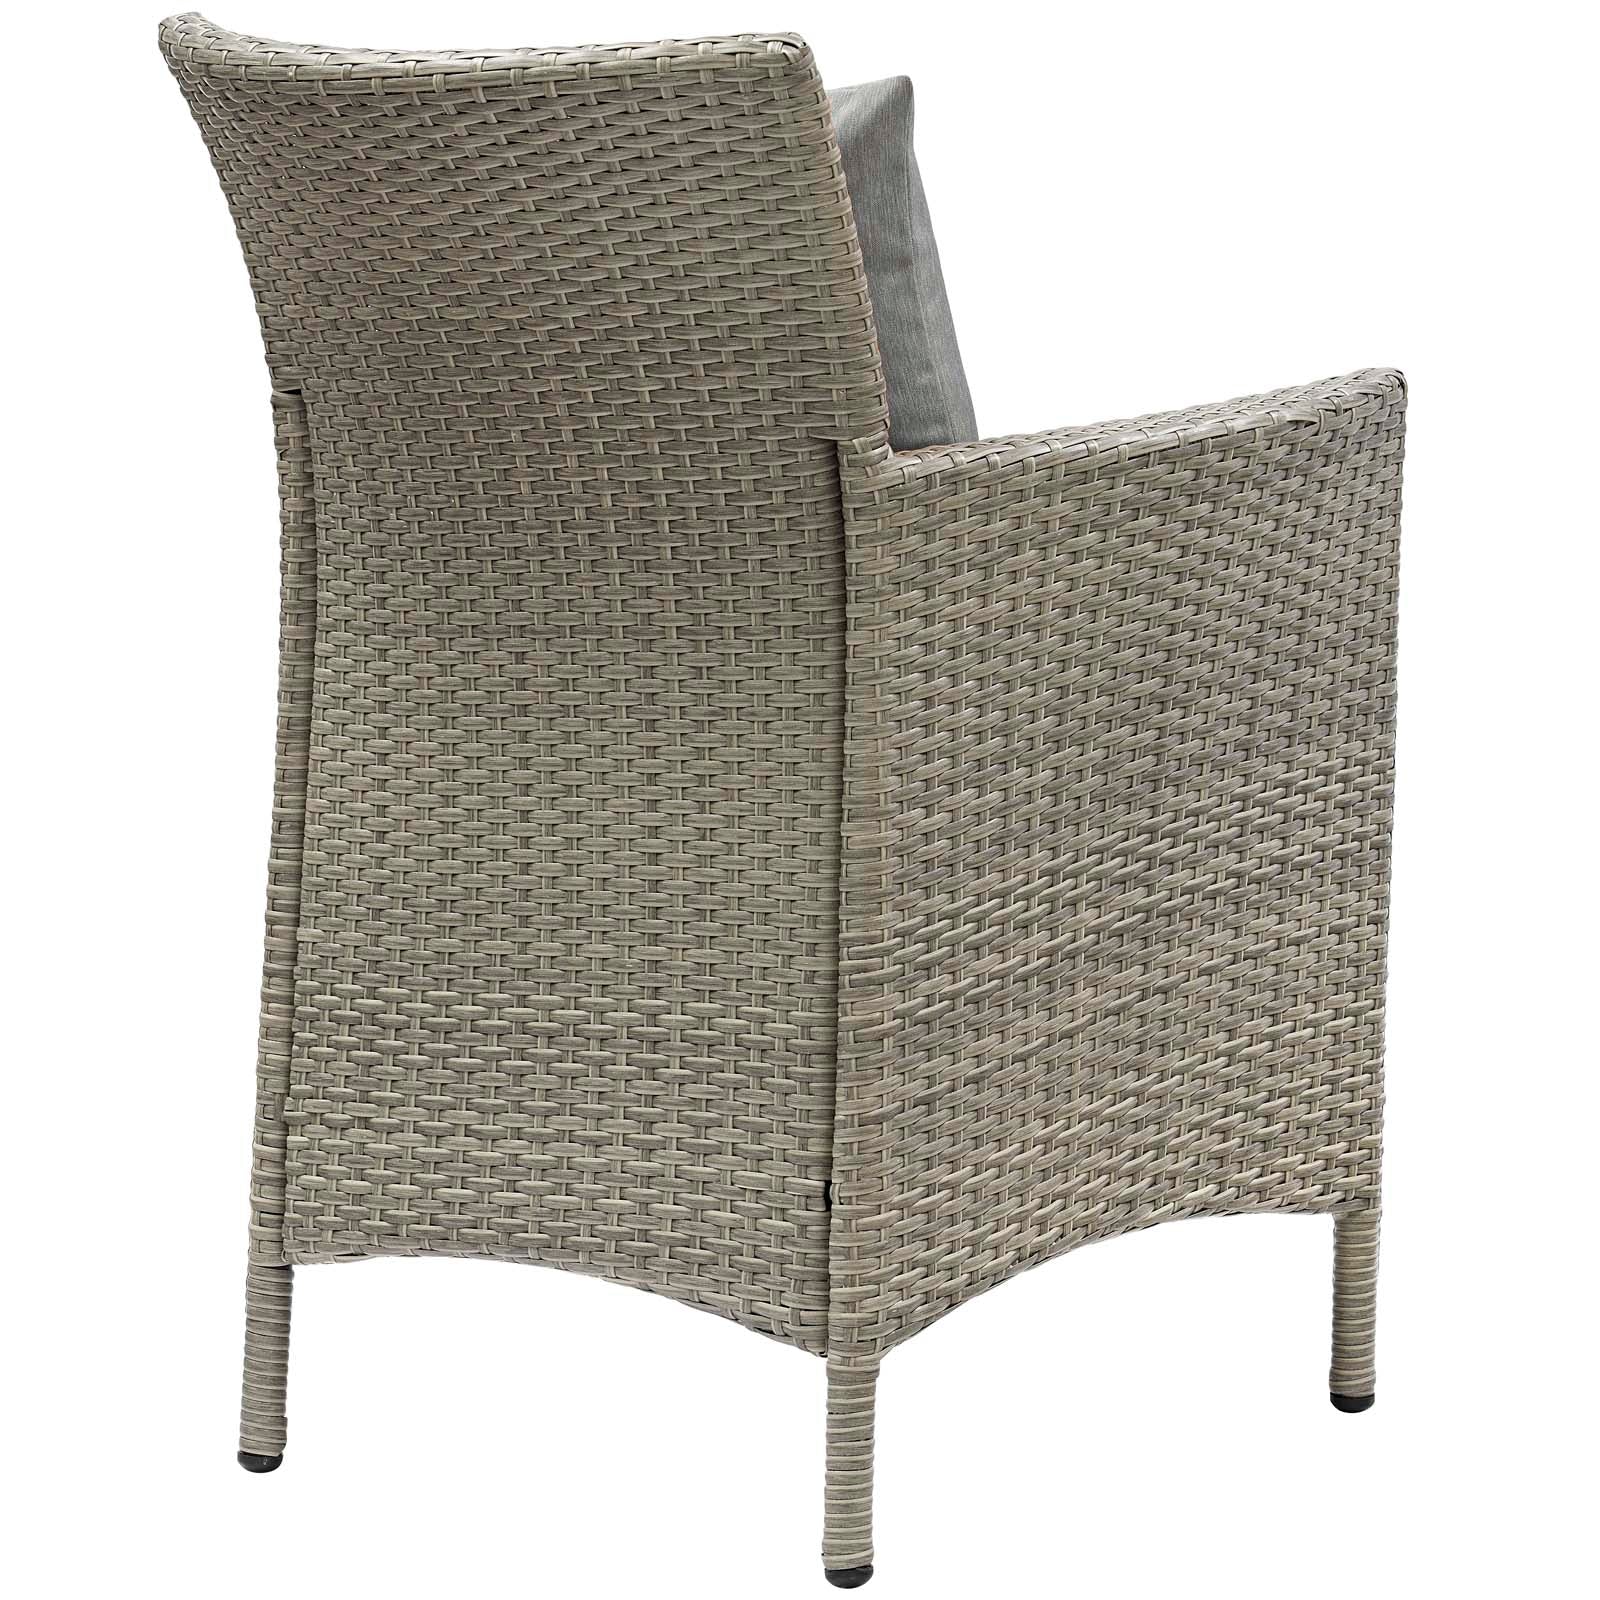 Modway Outdoor Dining Chairs - Conduit Outdoor Patio Wicker Rattan Dining Armchair Light Gray